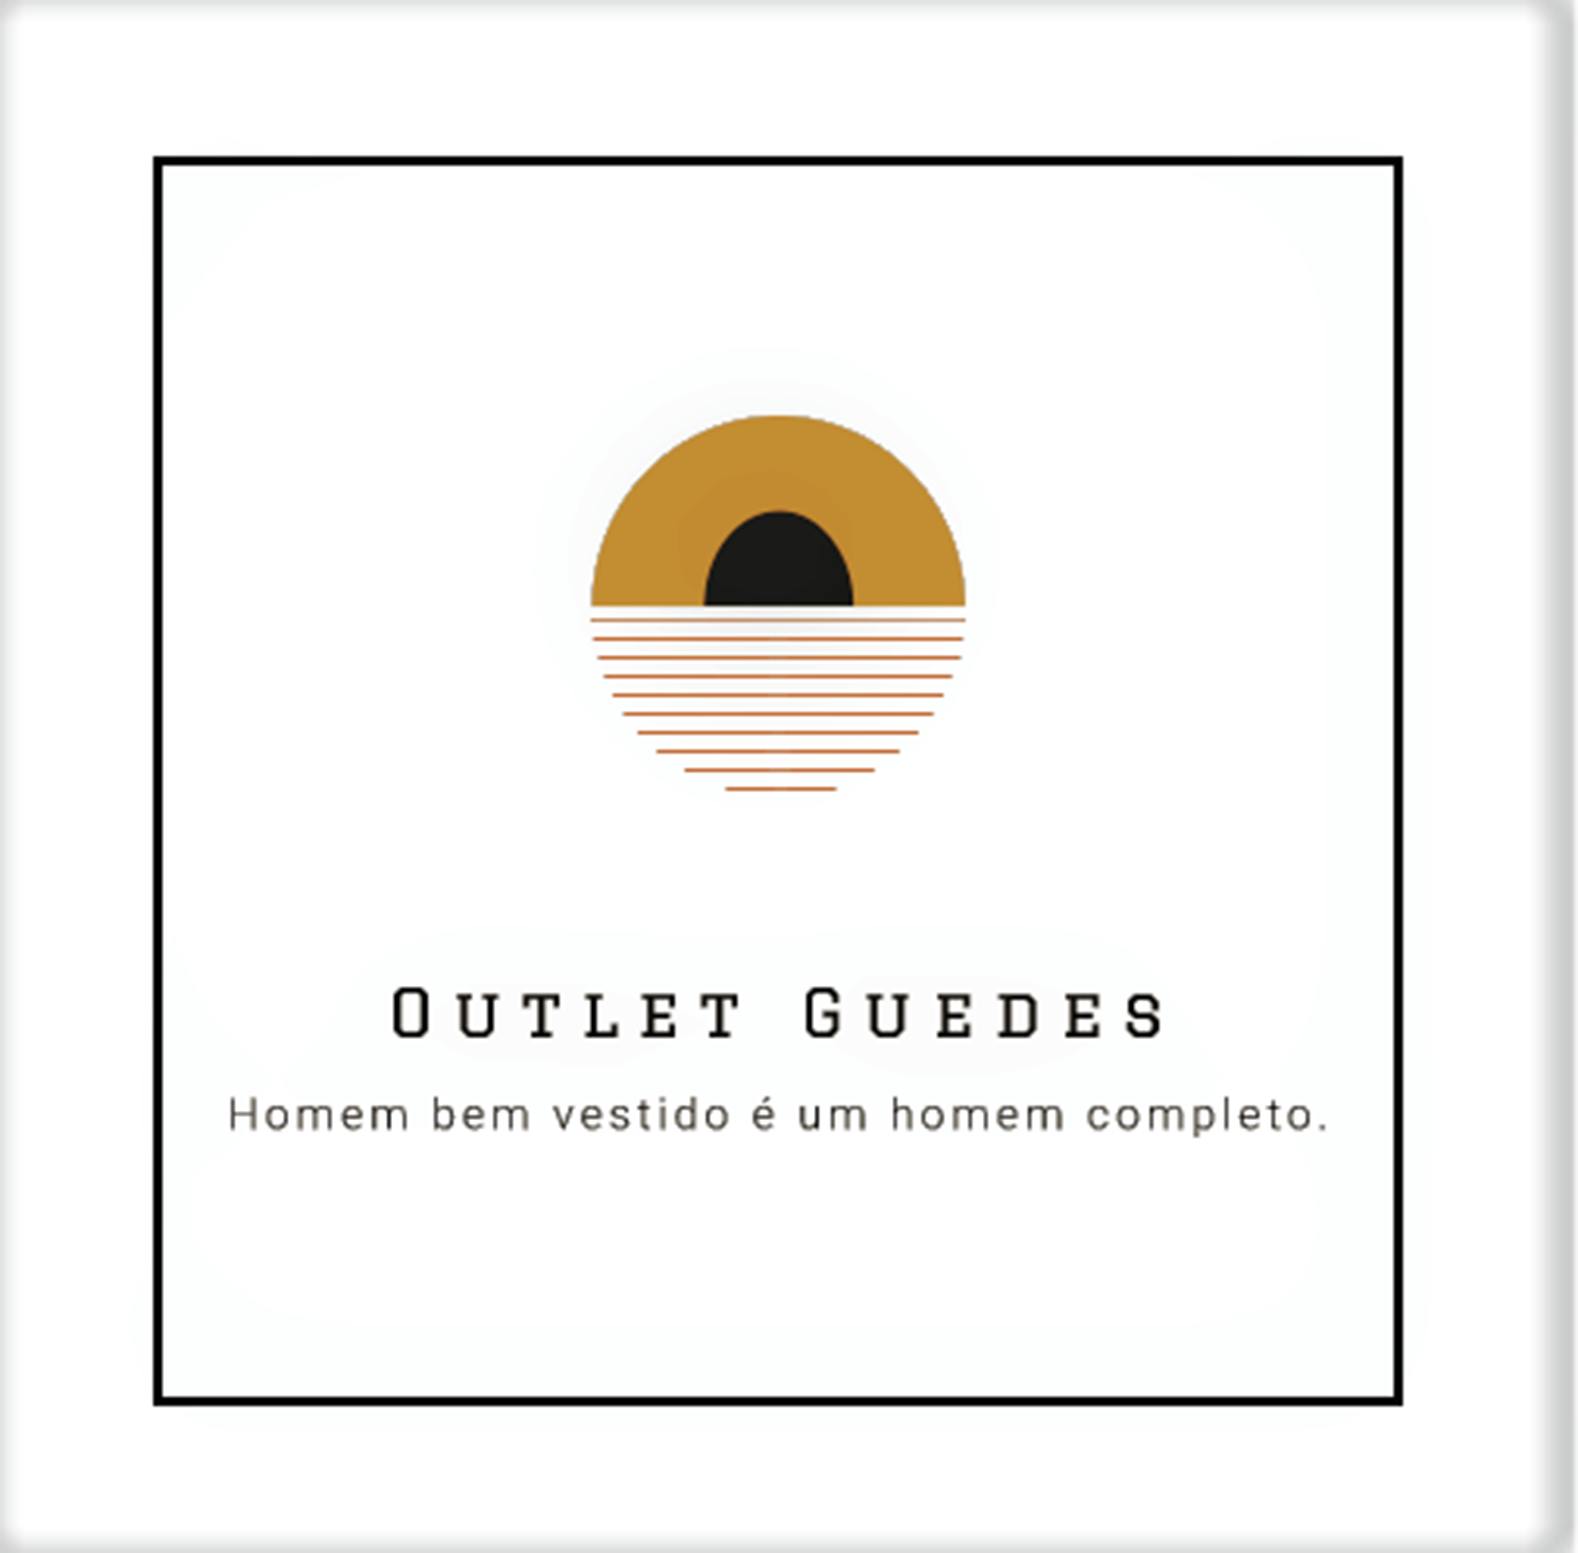 Outlet Guedes